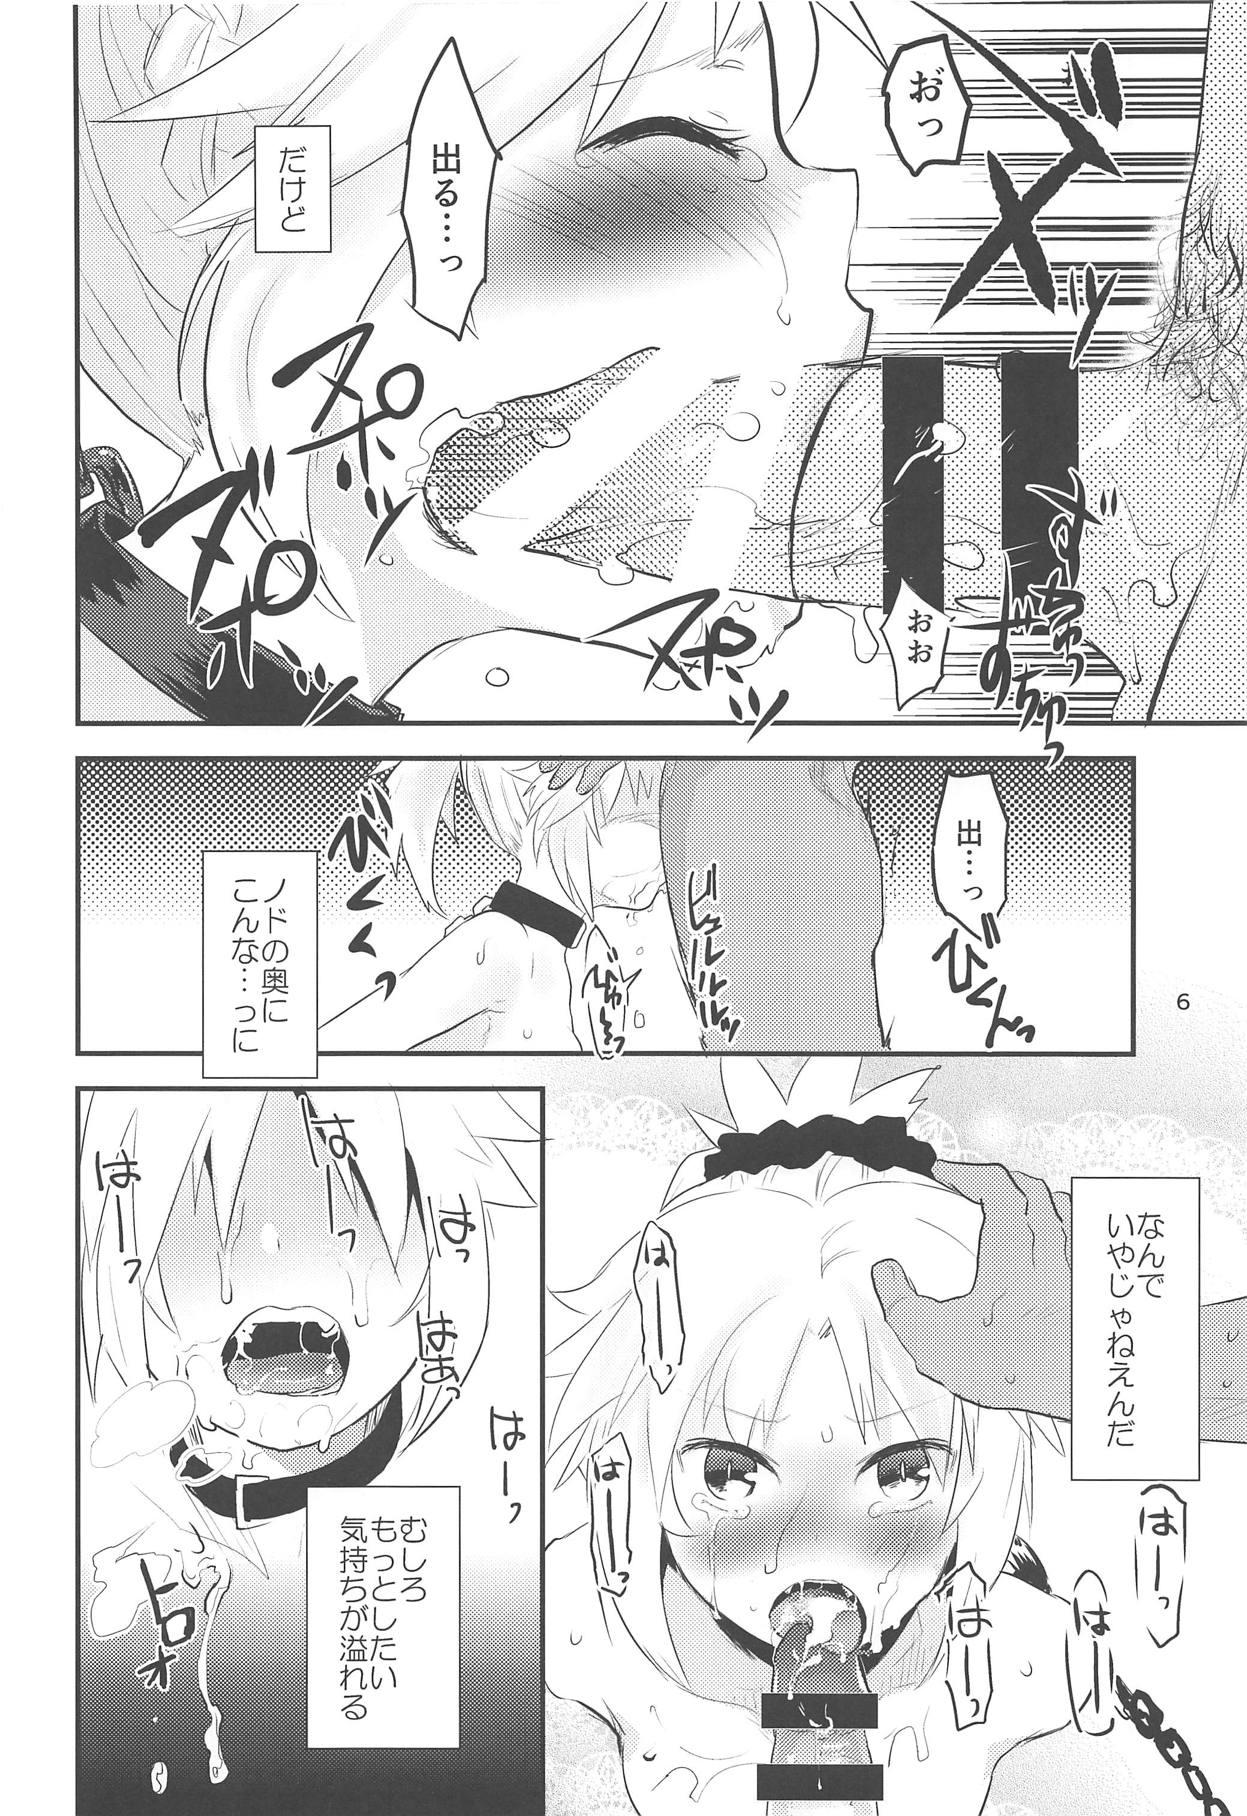 Vecina Erotic to Knight - Fate grand order Hair - Page 5